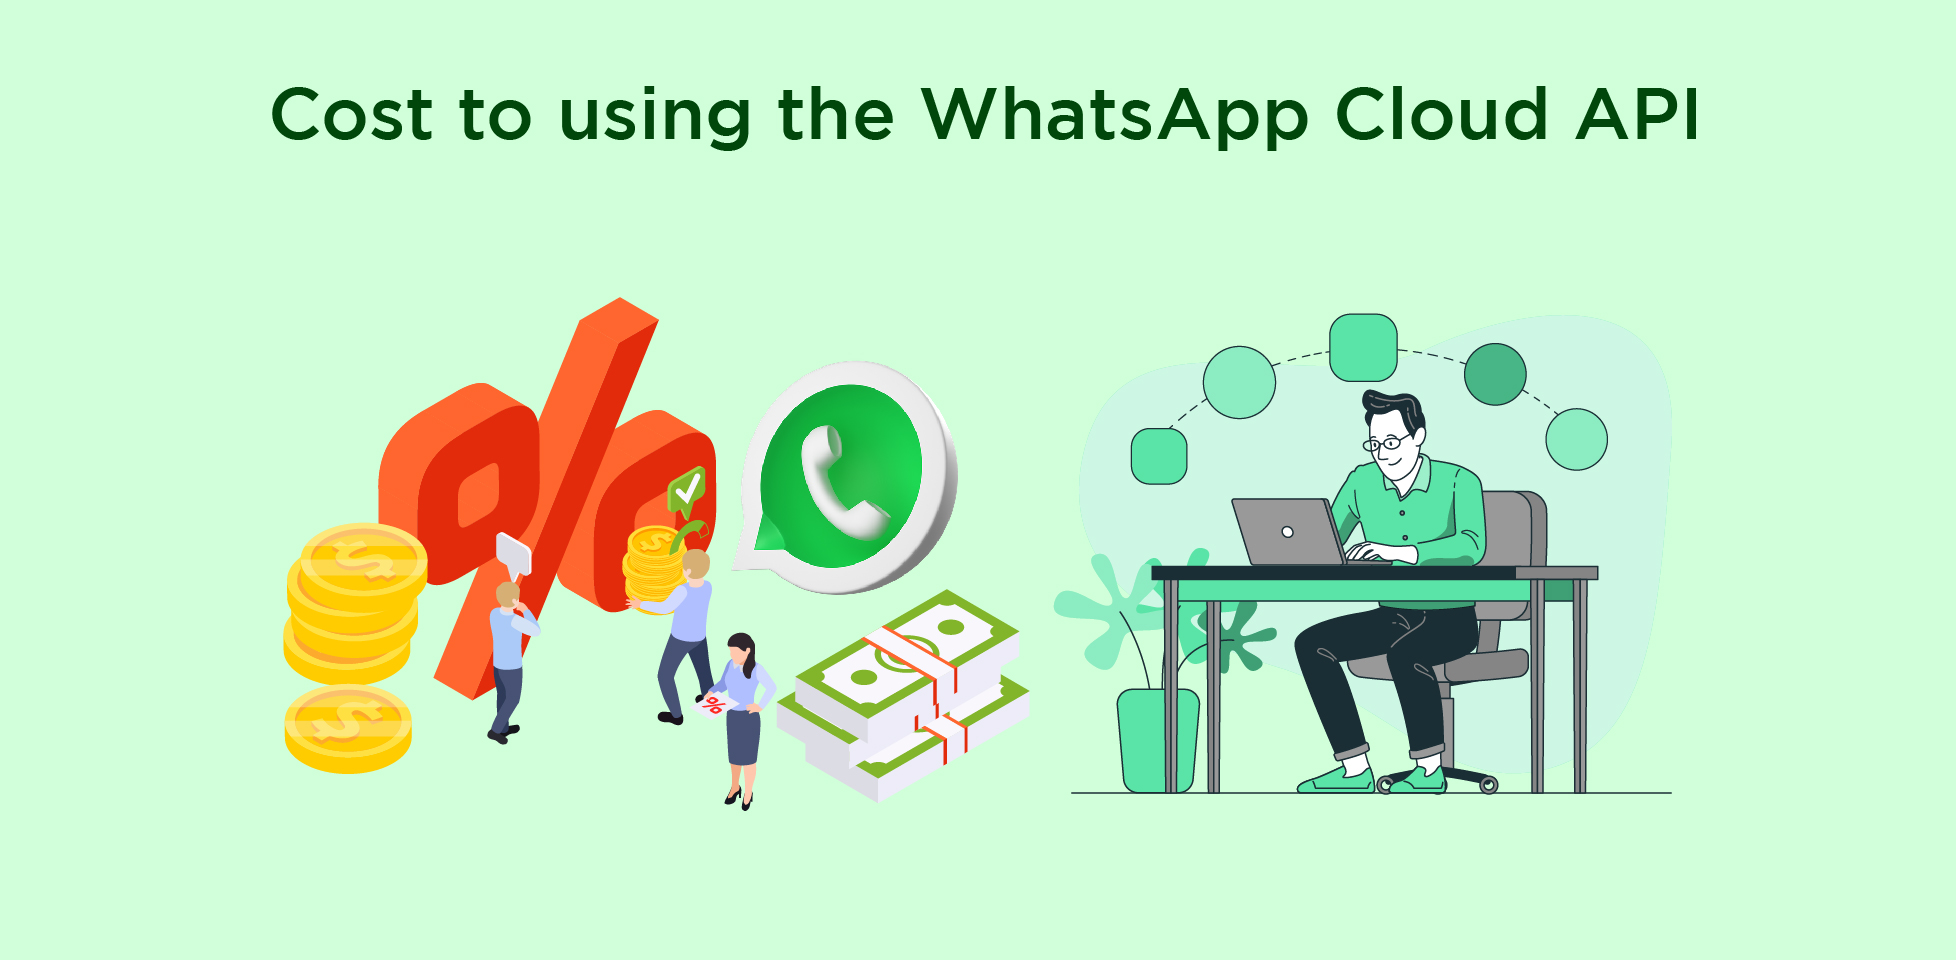 Is there a cost to using the WhatsApp Cloud API?